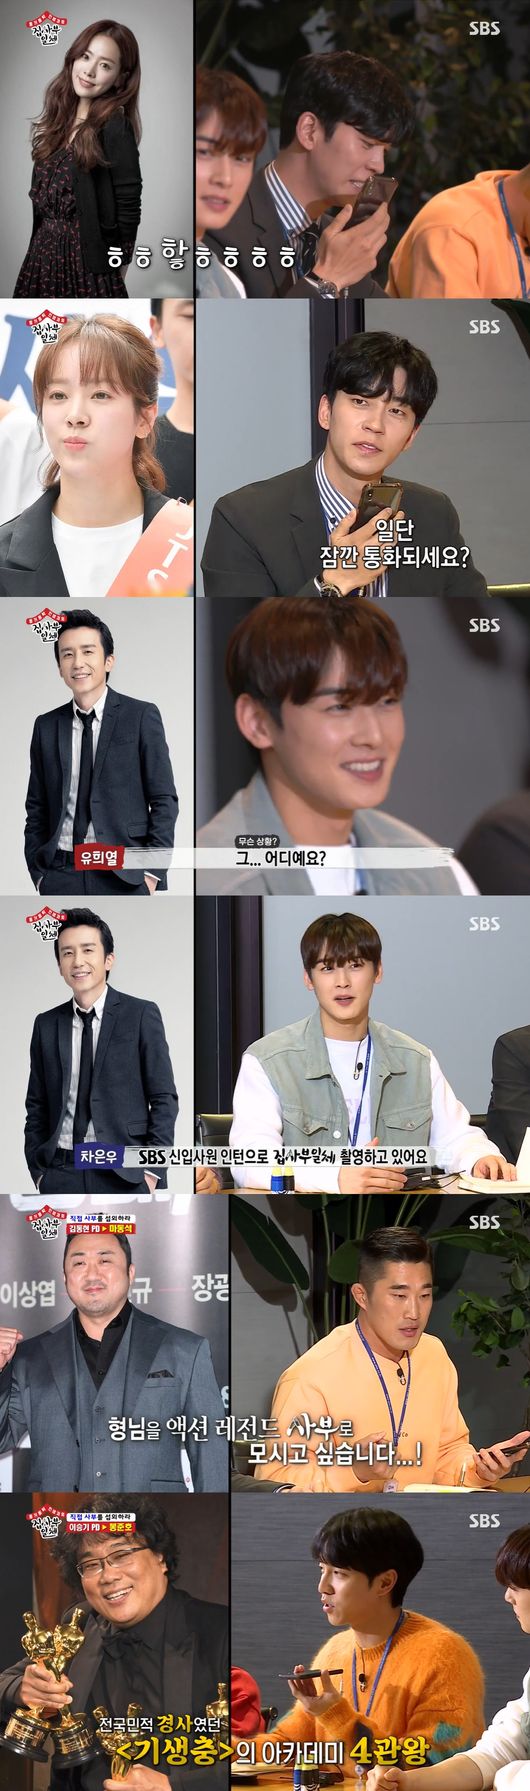 All The Butlers Lee Seung-gi, Shin Sung-rok, Yang Se-hyeong, Jung Eun-woo and Kim Dong-Hyun predicted a different fun while Top Model directly in the masters office.Han Ji-min, Baek Jong-won, You Hee-yeol, Ma Dong-Seok and Bong Joon-ho showed positive answers.In SBS All The Butlers broadcasted on the afternoon of the 26th, Lee Seung-gi, Shin Sung-rok, Yang Se-hyeong, Cha Jung Eun-woo, and Kim Dong-Hyun, who received the mission of Lets get a masterOn this day, All The Butlers members listened to the last mission of Sambu and mobilized their personal connections.Shin Sung-rok, who first came to Top Model, saying hands tremble, pointed to Han Ji-min, who carefully said, Can you speak for a minute?, and Han Ji-min said, Wait, what, I thought you were drunk.Also, Han Ji-min, in Shin Sung-roks offer of a referral to him, said, What Master of me? Youre making ridiculous noise.Youre really good at broadcasting, arent you????????????????????????????????????????????????????????????????????????????????????????????????????????????????????????????Call me after youre done, he said, making me look forward to appearing as a master.All The Butlers youngest car, Jung Eun-woo, said, I have never contacted you in private, so I did not have a contact information personally.I feel sorry, he said, calling You Hee-yeol.But You Hee-yeol was nervous about the car Jung Eun-woo, who asked for his first call, saying, I was thinking, Is this friend more sane than he looks?Especially, You Hee-yeol said, Where are you now? And toward Jung Eun-woo, who seems to be going to visit right now.Jung Eun-woo is very aggressive. Its not a good term for broadcasting, but its a stone + child. In the end, You Hee-yeol promised to appear in All The Butlers, saying, I am not confident that I will do well, but If I can meet next time, it will not be bad to meet and talk later.All The Butlers Yang Se-hyeong mentioned Baek Jong-won, saying, It is food that accounts for more than 80% of happiness in life, but it is a senior who tells the food.Its a good idea, lets think about it and say it, replied Baek Jong-won, who is showing off his pleasant breathing with Yang Se-hyeong through other programs.Kim Dong-Hyun was the top model in the actor Ma Dong-Seok, who was rarely featured in the entertainment program.Ma Dong-Seok said, Im preparing for the movie Crime City 2 and Im resting because I cant shoot. Tell me anything.Anything Dong Hyun asks (it is possible), he expressed his unusual affection for Kim Dong-Hyun.Ma Dong-Seok also said, The martial arts legend Kim Dong-Hyun came out, but I do not think I need to go out again. Kim Dong-Hyuns proposal, Why do not you try to fight with me? He promised, I will make fun when it is time.All The Butlers Lee Seung-gi worked hard to win the Academys four-time title, Bong Joon-ho.I have never actually met, but I received a number from the production team for the appearance of All The Butlers.Lee Seung-gi said, I am a new person who wrote the history of Korea, but said, I also want to be honest.However, when Bong Joon-hos cell phone was turned off and he did not answer the phone, Lee Seung-gi left a voice message saying, I wanted to call you once.All The Butlers, which has a strong impression on viewers every time, with various masters such as sports and baduk beyond the entertainment industry.It is expected that Han Ji-min, You Hee-yeol, Baek Jong-won, Ma Dong-Seok and Bong Joon-ho will be able to show off the charm of reversal that they have not seen in the broadcast through All The Butlers.On the other hand, SBS All The Butlers is a life tutoring program for young people full of question marks and my way geek masters. It is broadcast every Sunday at 6:25 pm.SBS All The Butlers captures broadcast screen